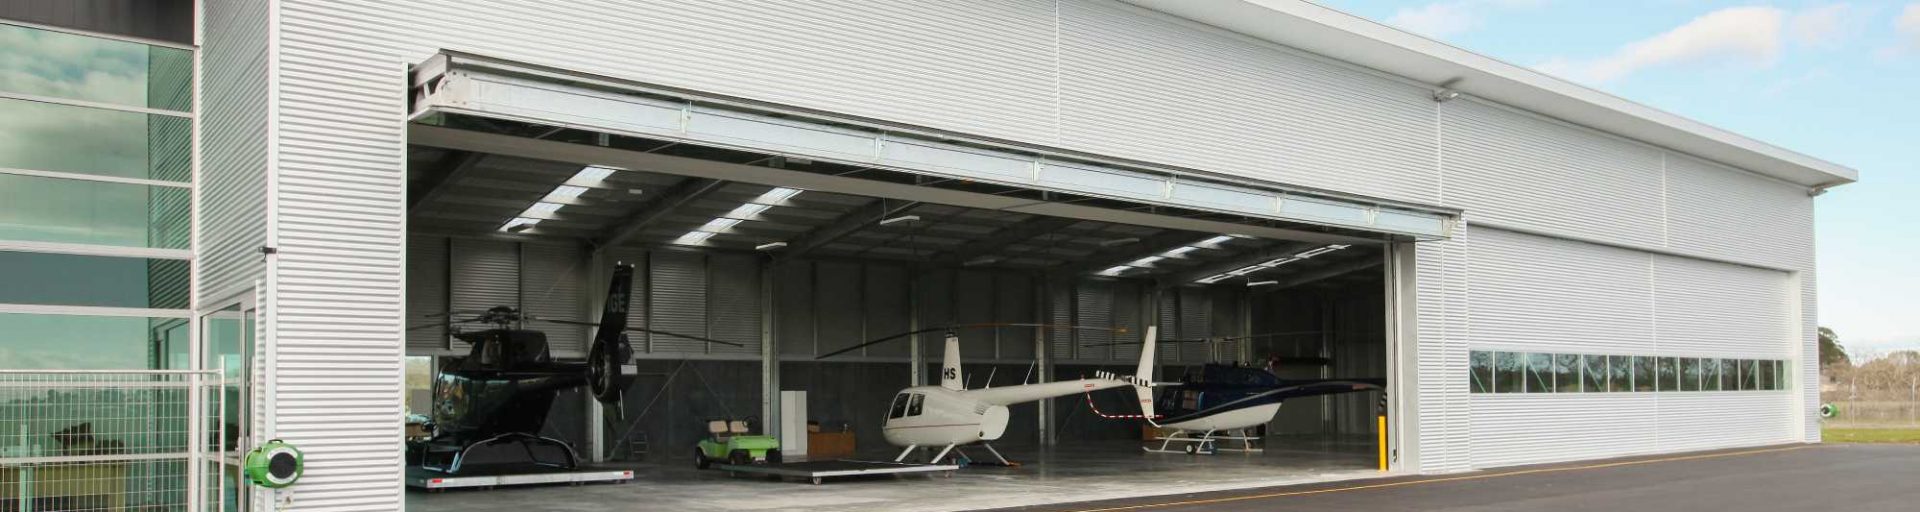 steel hangar for aircraft by Coresteel